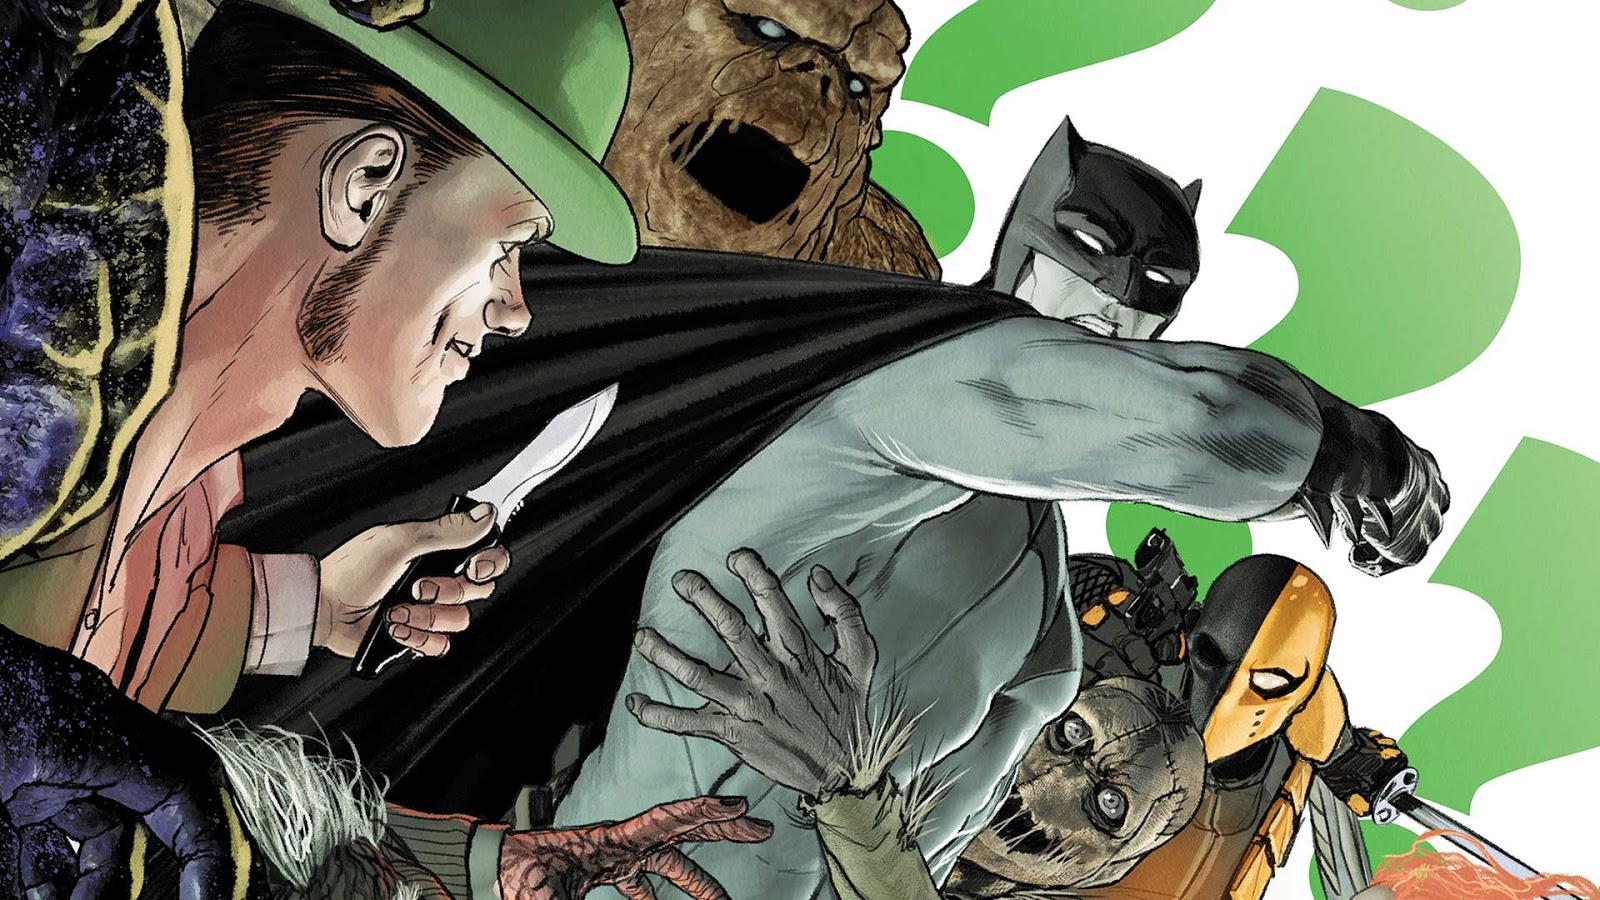 Weird Science DC Comics: Batman #30 Review and *SPOILERS*